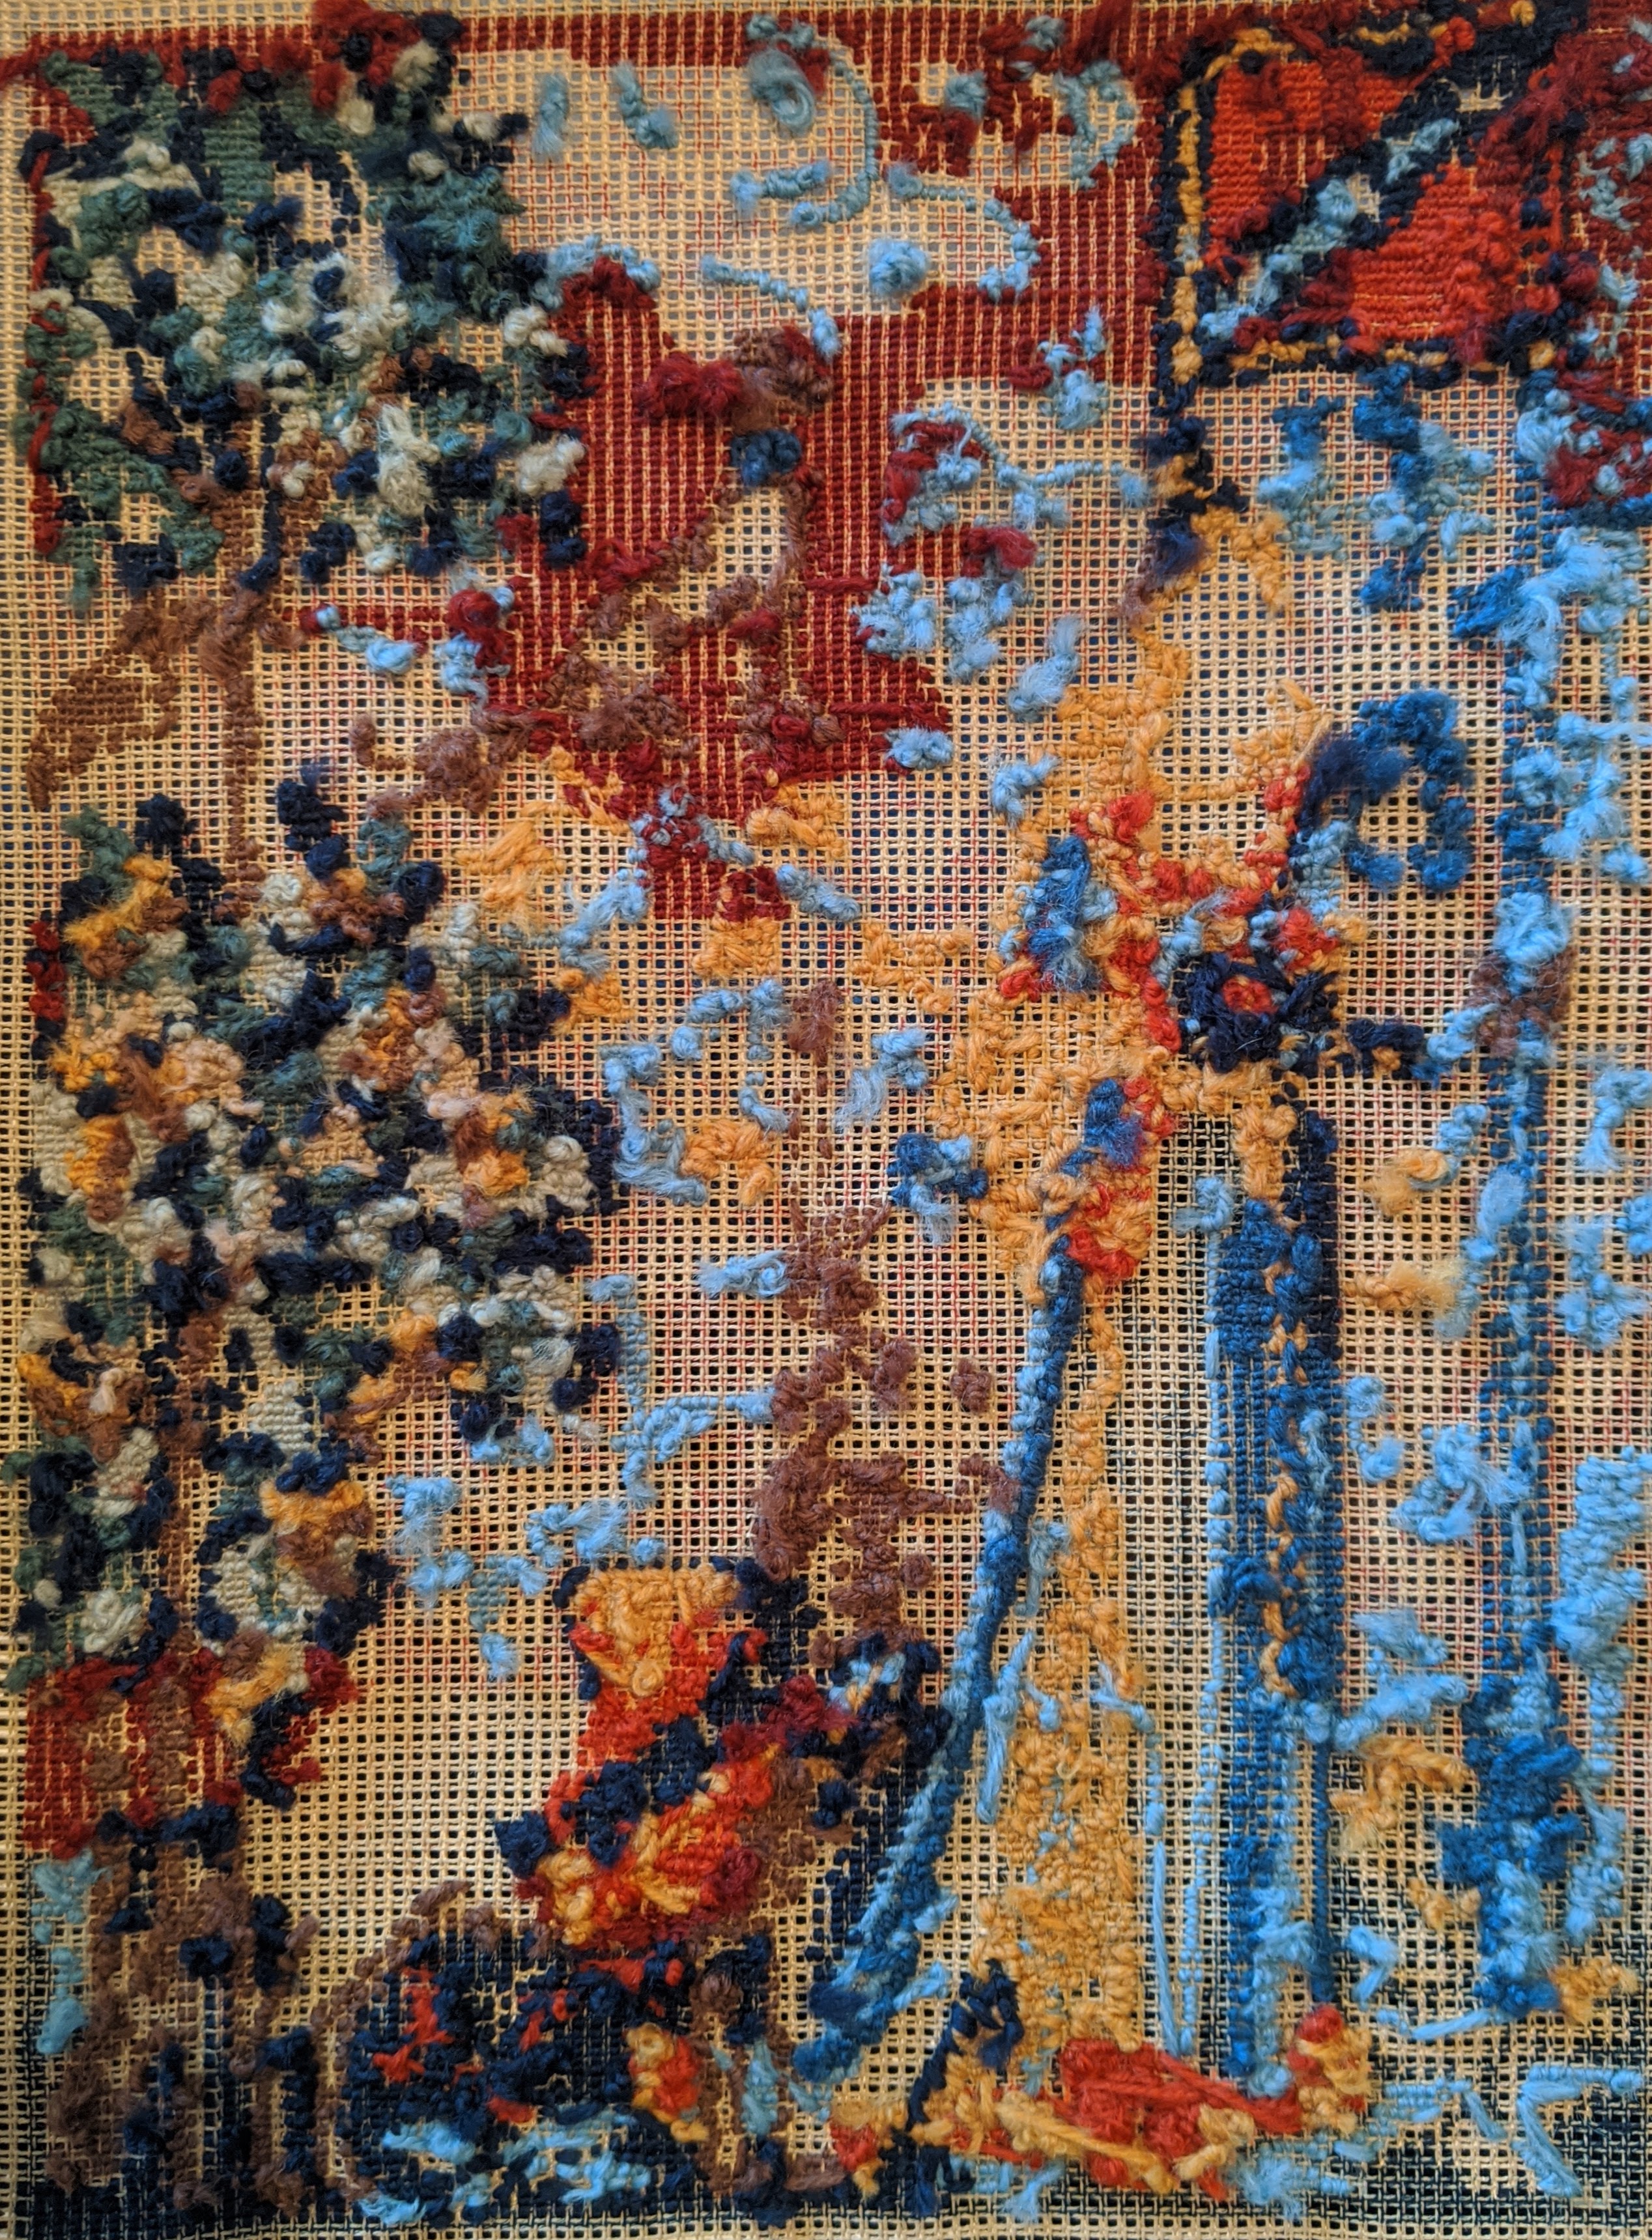 The back of the tapestry. A light red area in the top right is completely covered, whereas the dark red in the middle has columns of color with the canvas showing through in the middle.